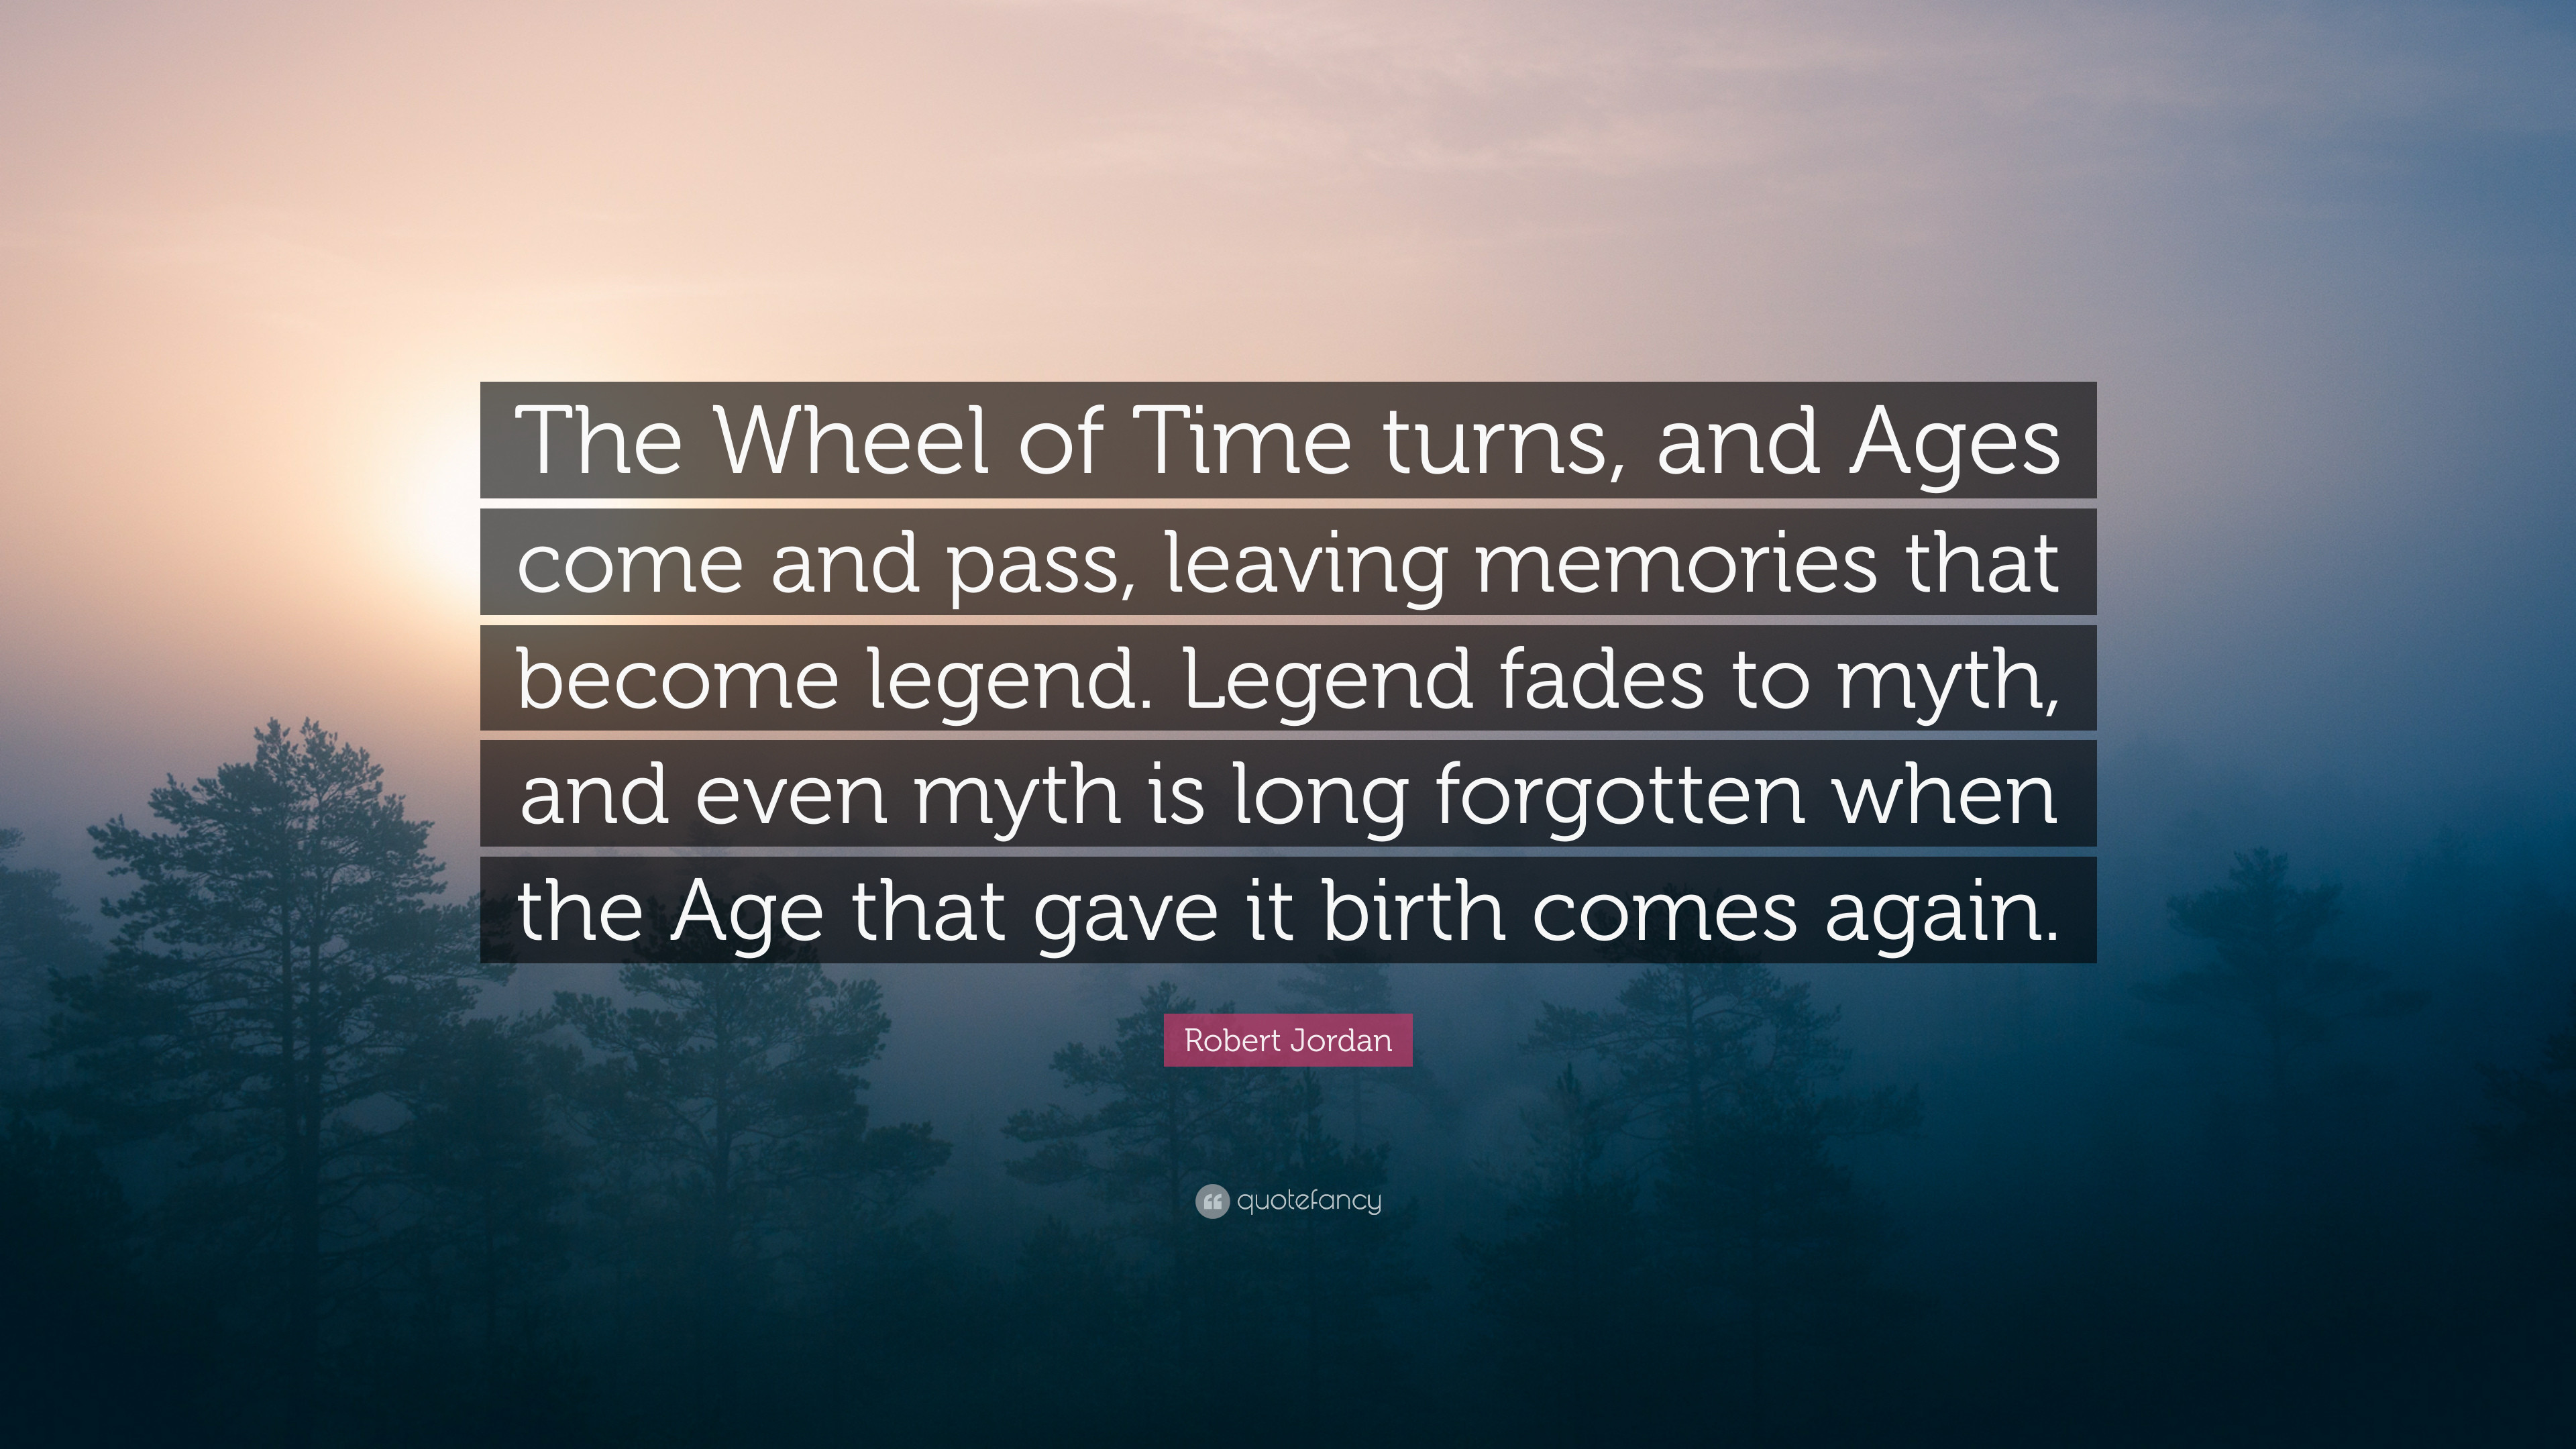 3840x2160 Robert Jordan Quote: “The Wheel of Time turns, and Ages come and pass